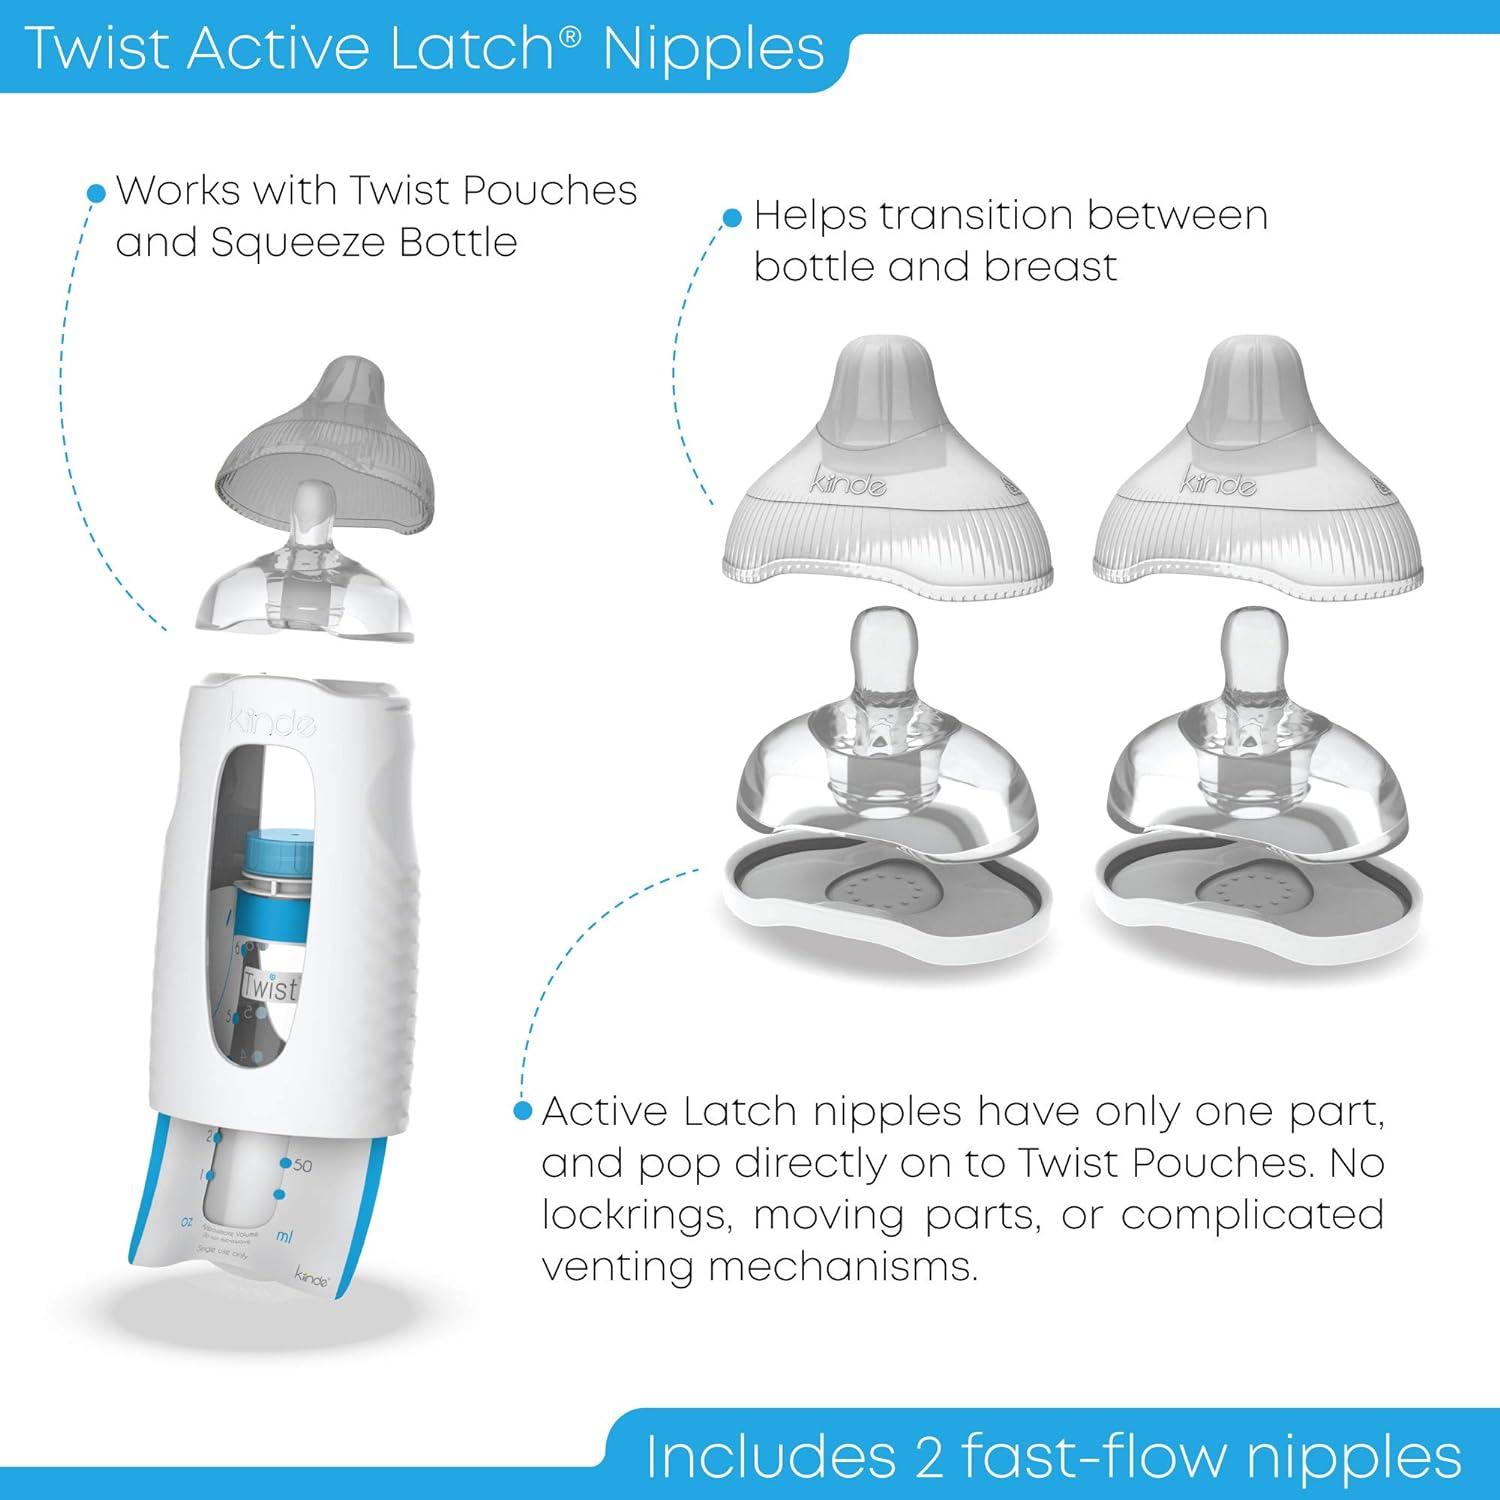 Kiinde Twist Squeeze Natural Feeding Bottle W/ Active Latch Nipples (2 Pack)